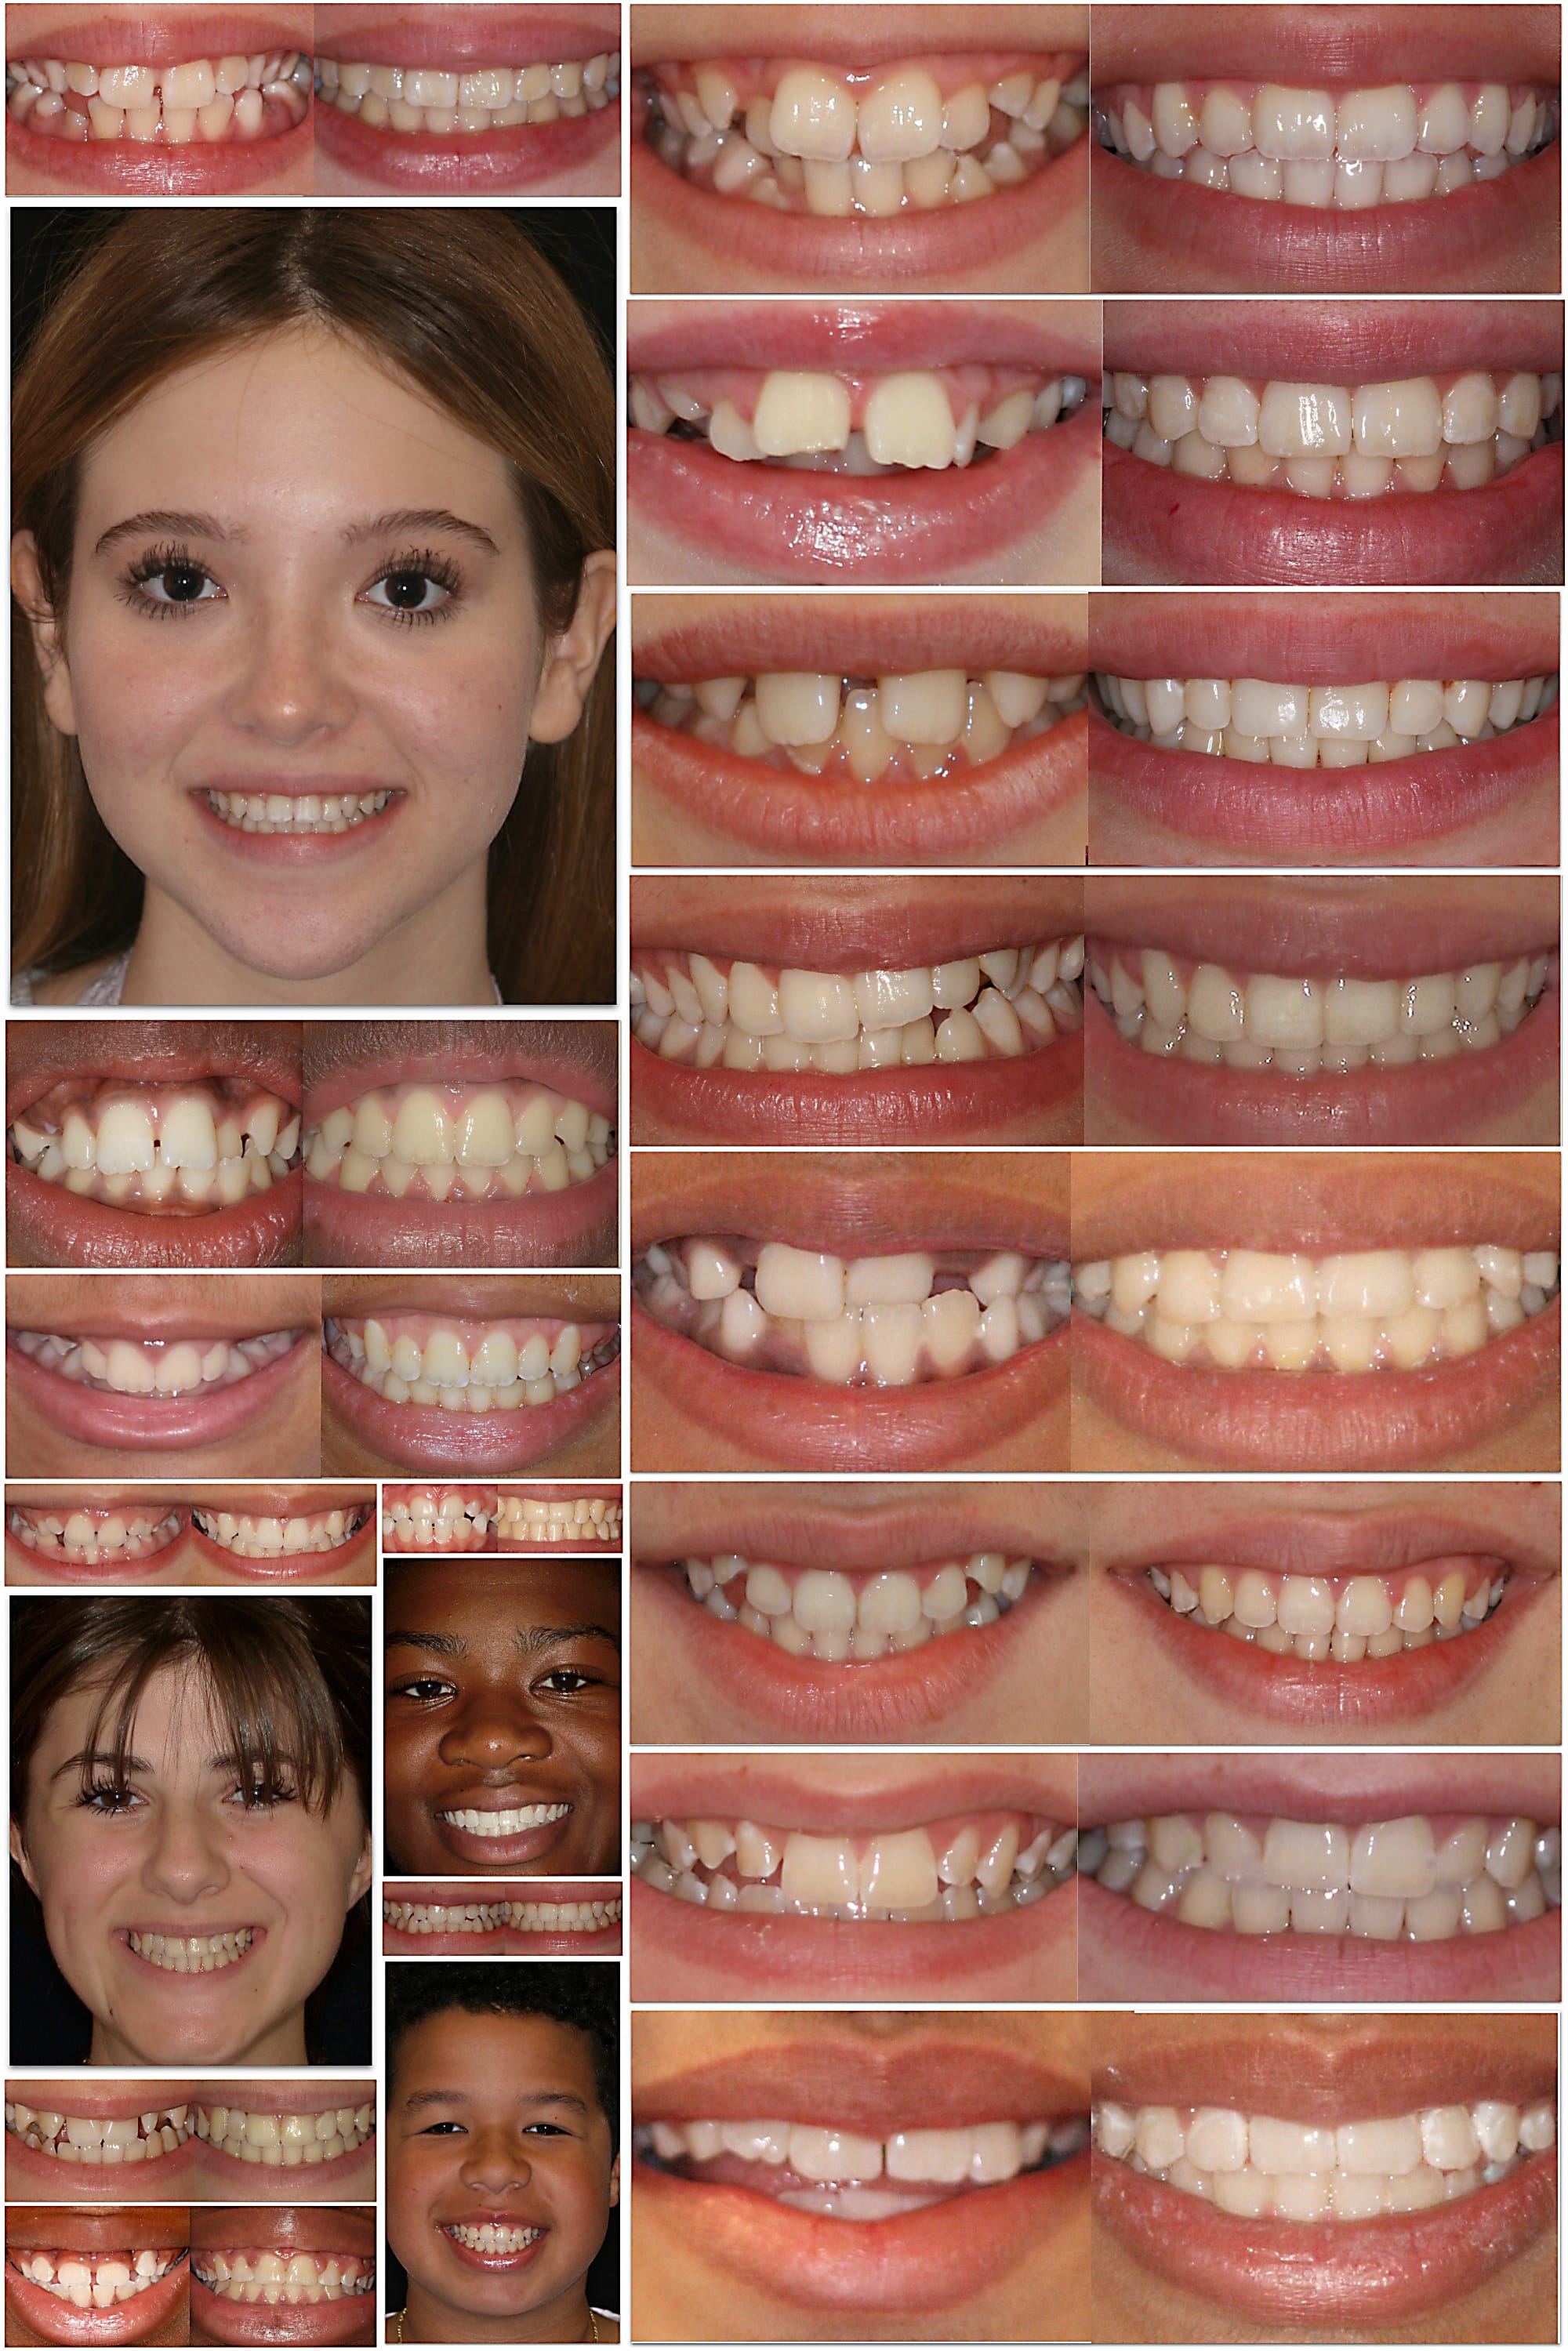 A collage of Dr. Zahedi's orthodontic patients before and after treatment with braces.